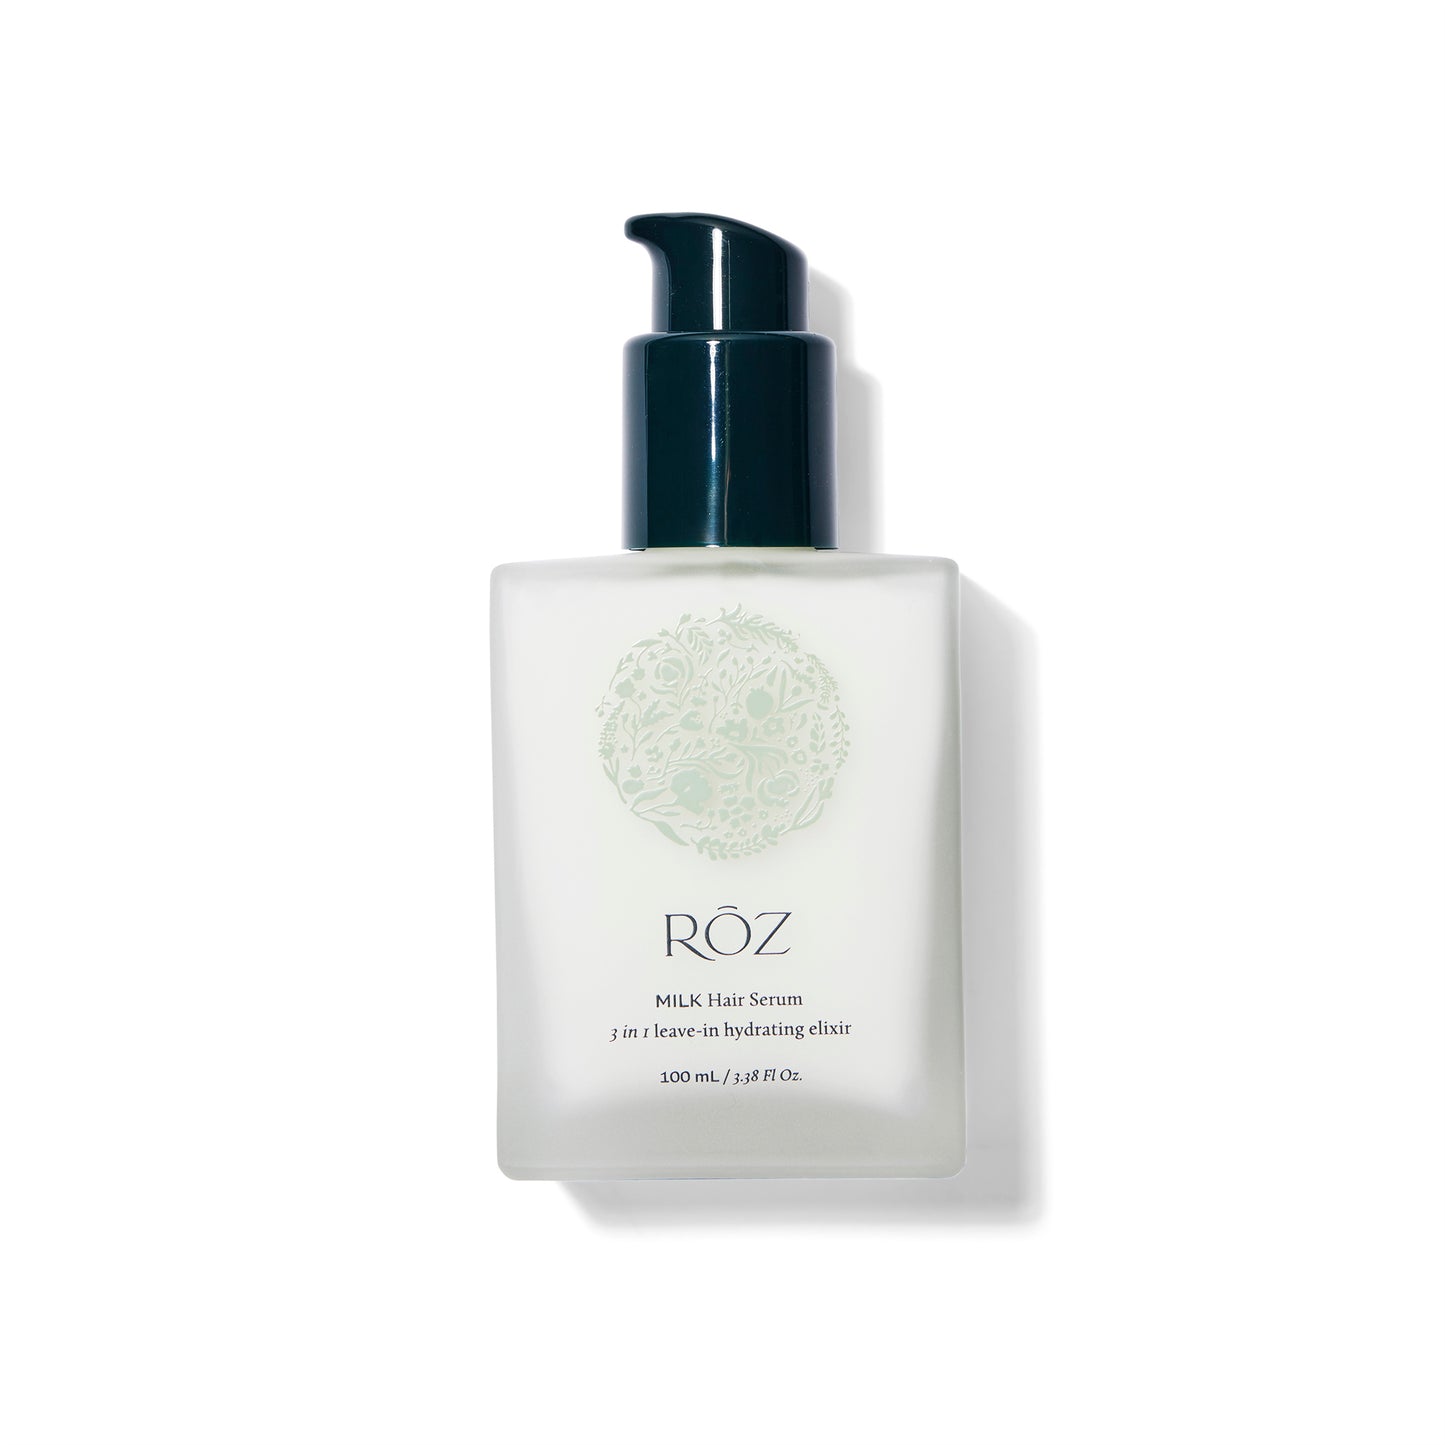 Front view of the ROZ Milk Serum. The bottle is glass with deep green pump. The cap is off. 